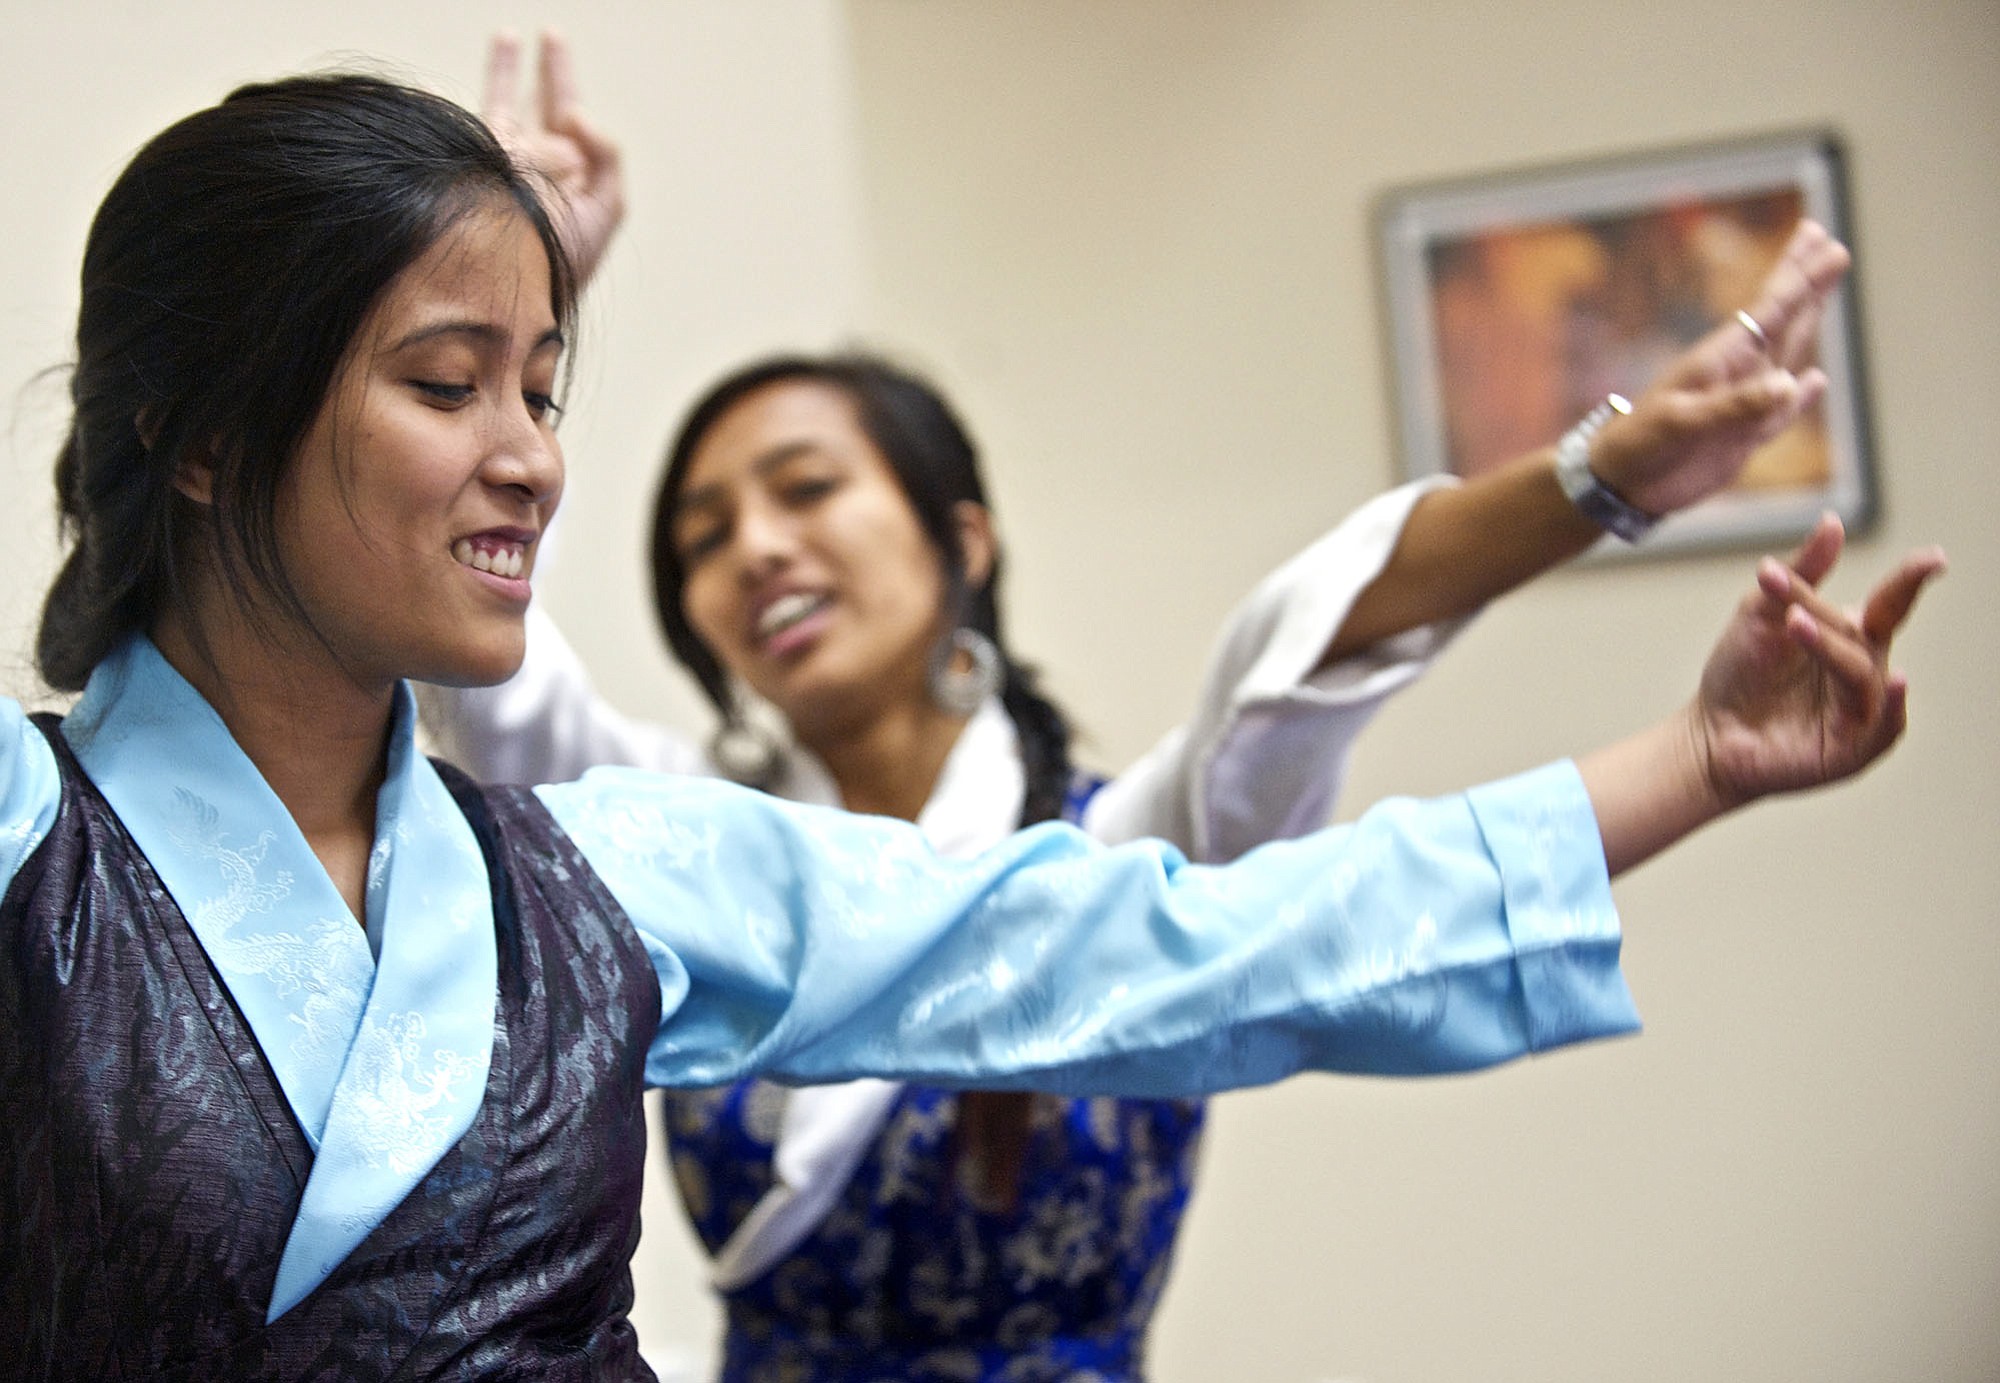 Nepalese visitors Manisha Sunuwar, 20, left, and Pooja Ghimire, 21, perform a traditional Nepalese dance at Shared Hope International on Friday.